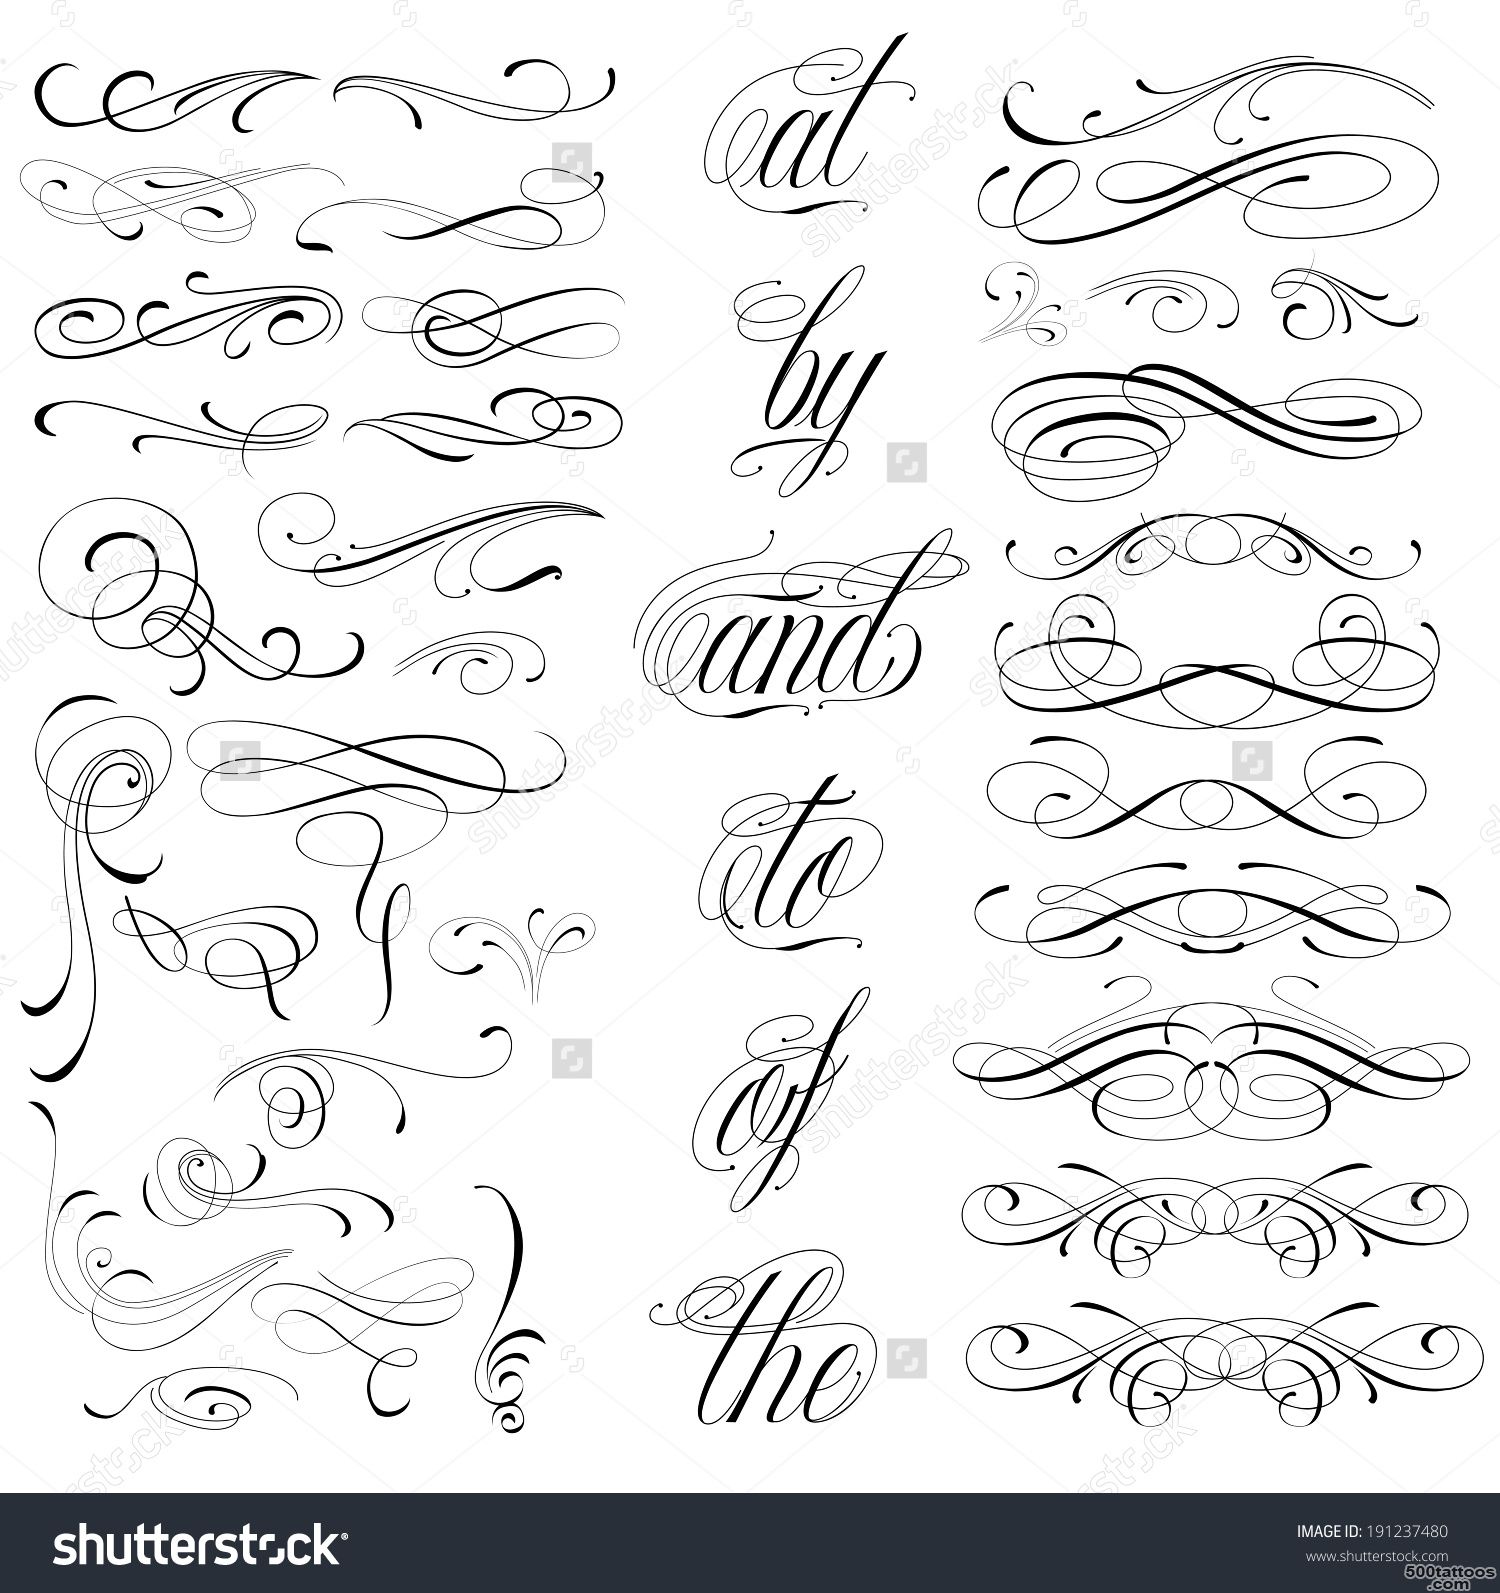 Handmade Tattoo Lettering And Decorative Elements Stock Vector ..._16